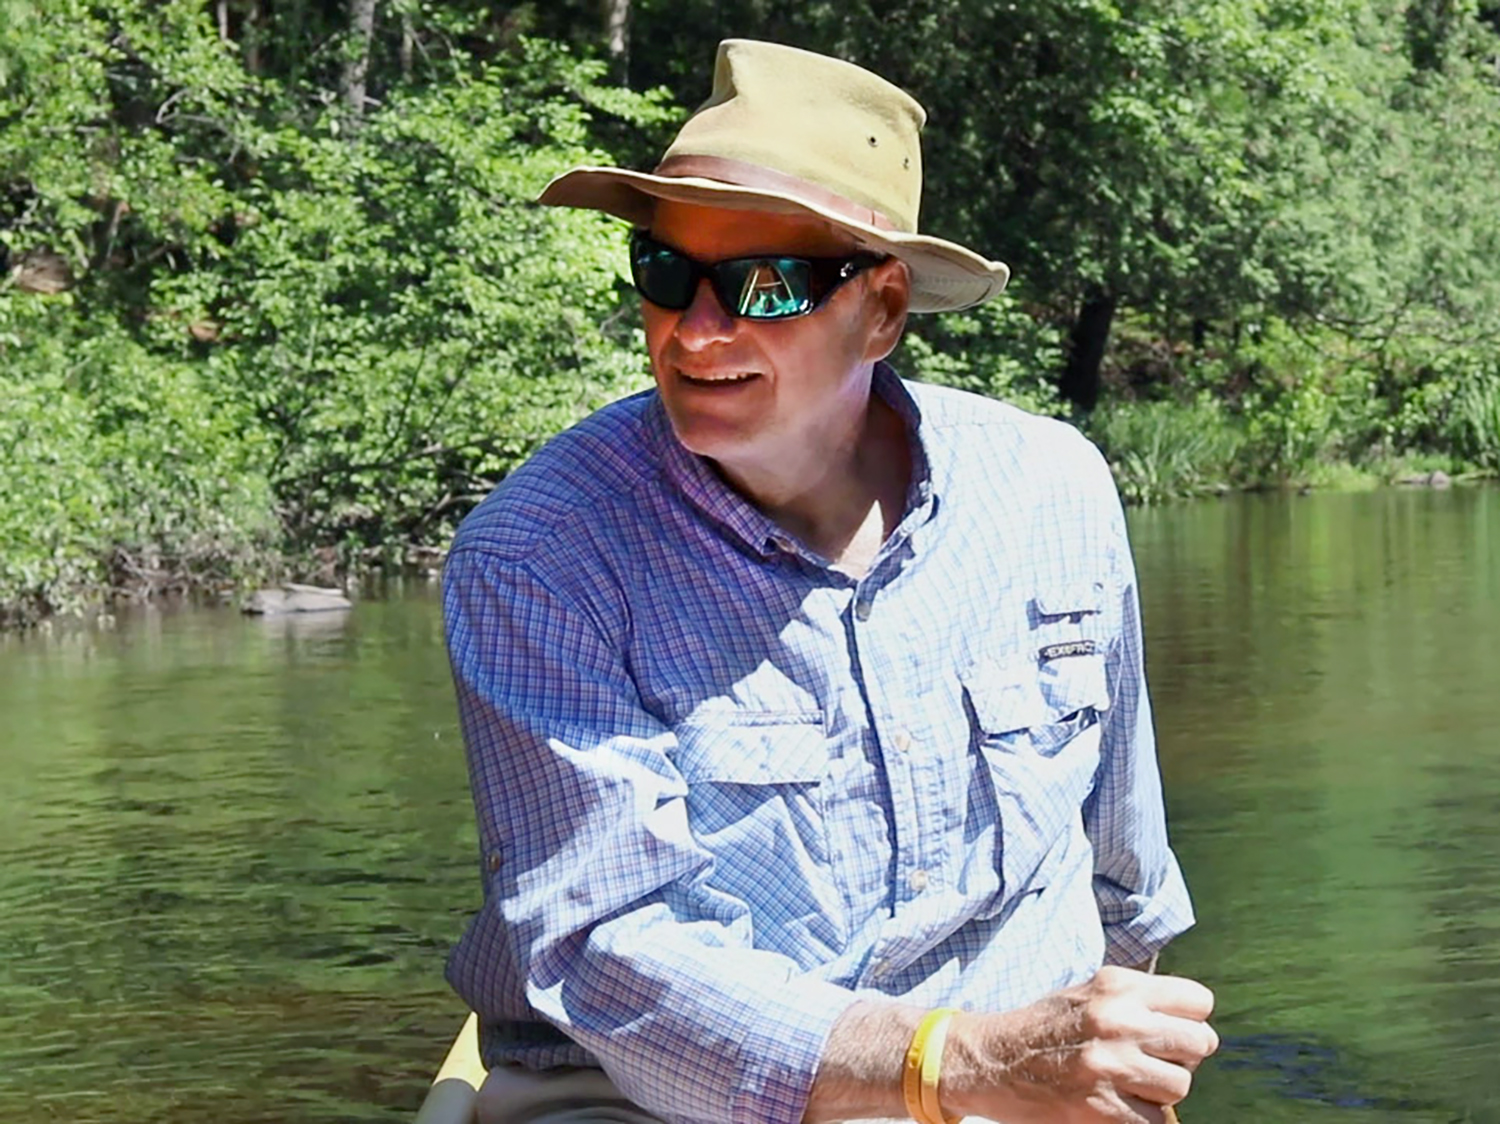 Man in blue-checked shirt, sunhat and sunglasses paddles canoe on a river with forest in the background.